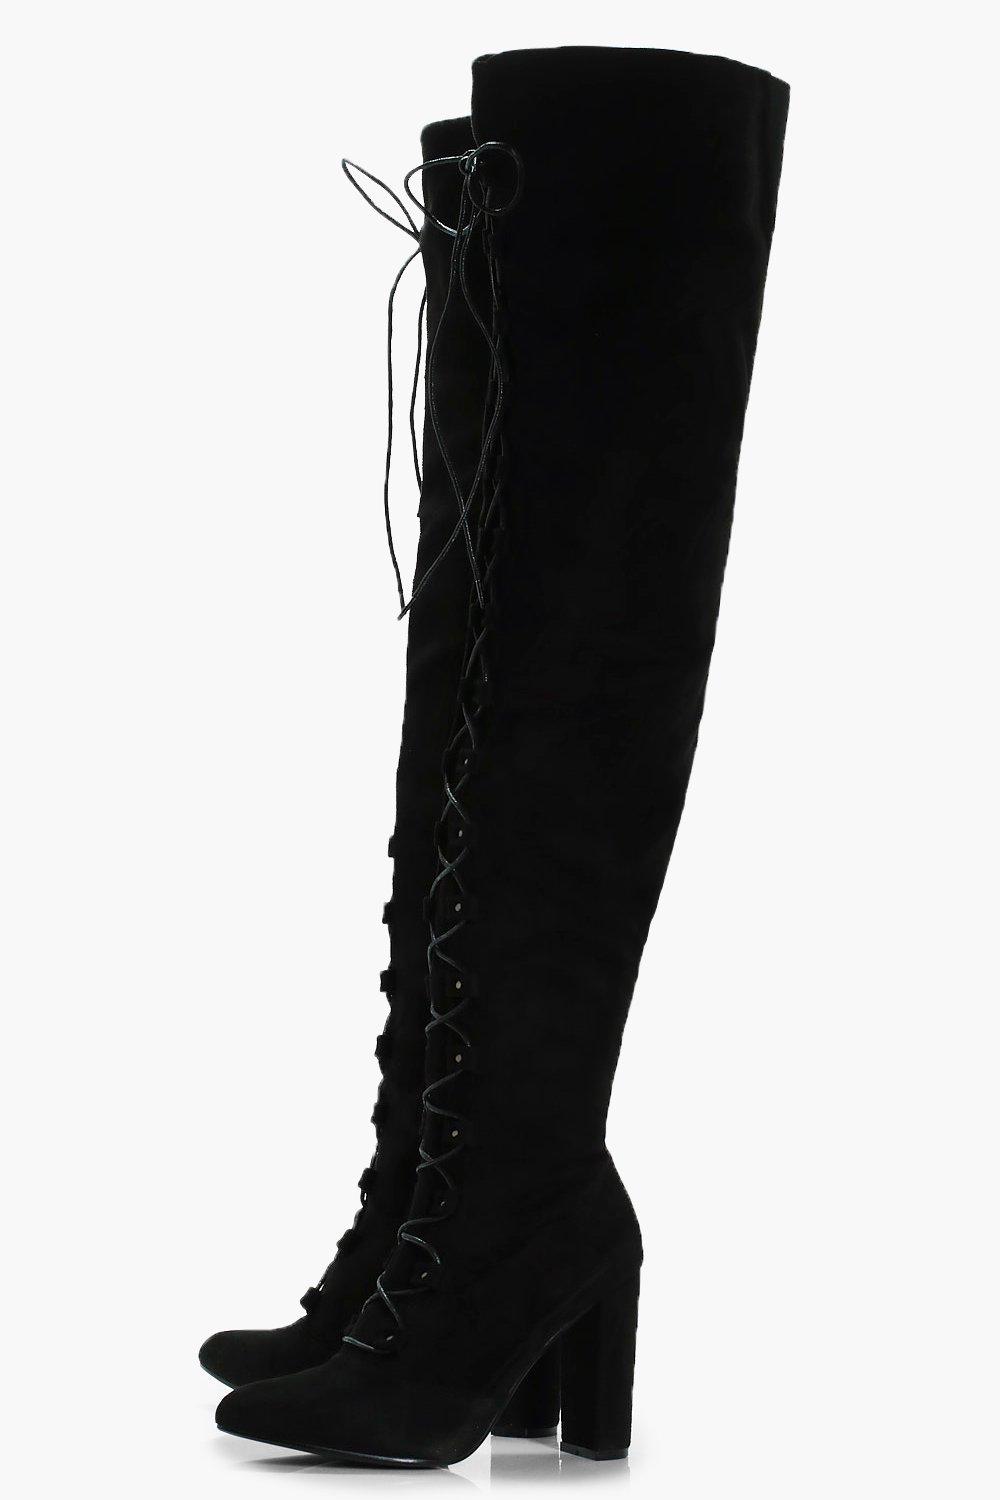 black round toe over the knee boots